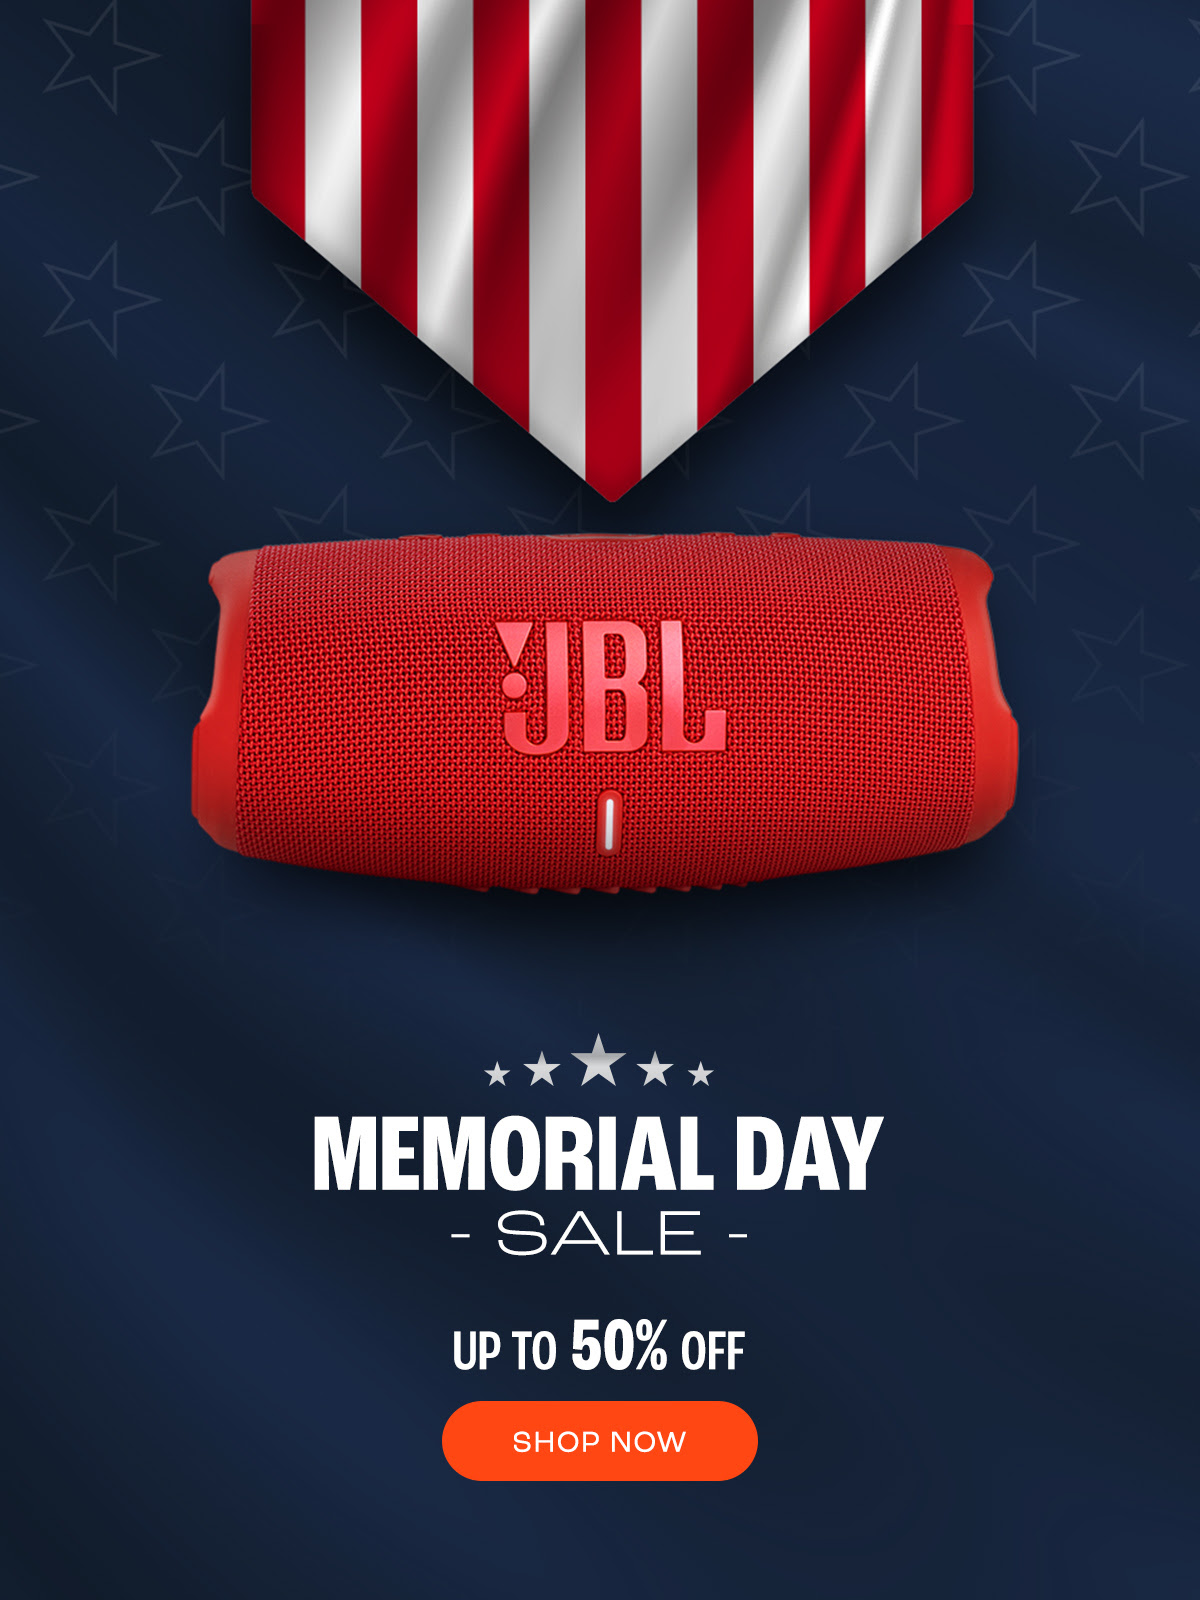 Memorial Day Sale - Save up to 50% off | Shop Now